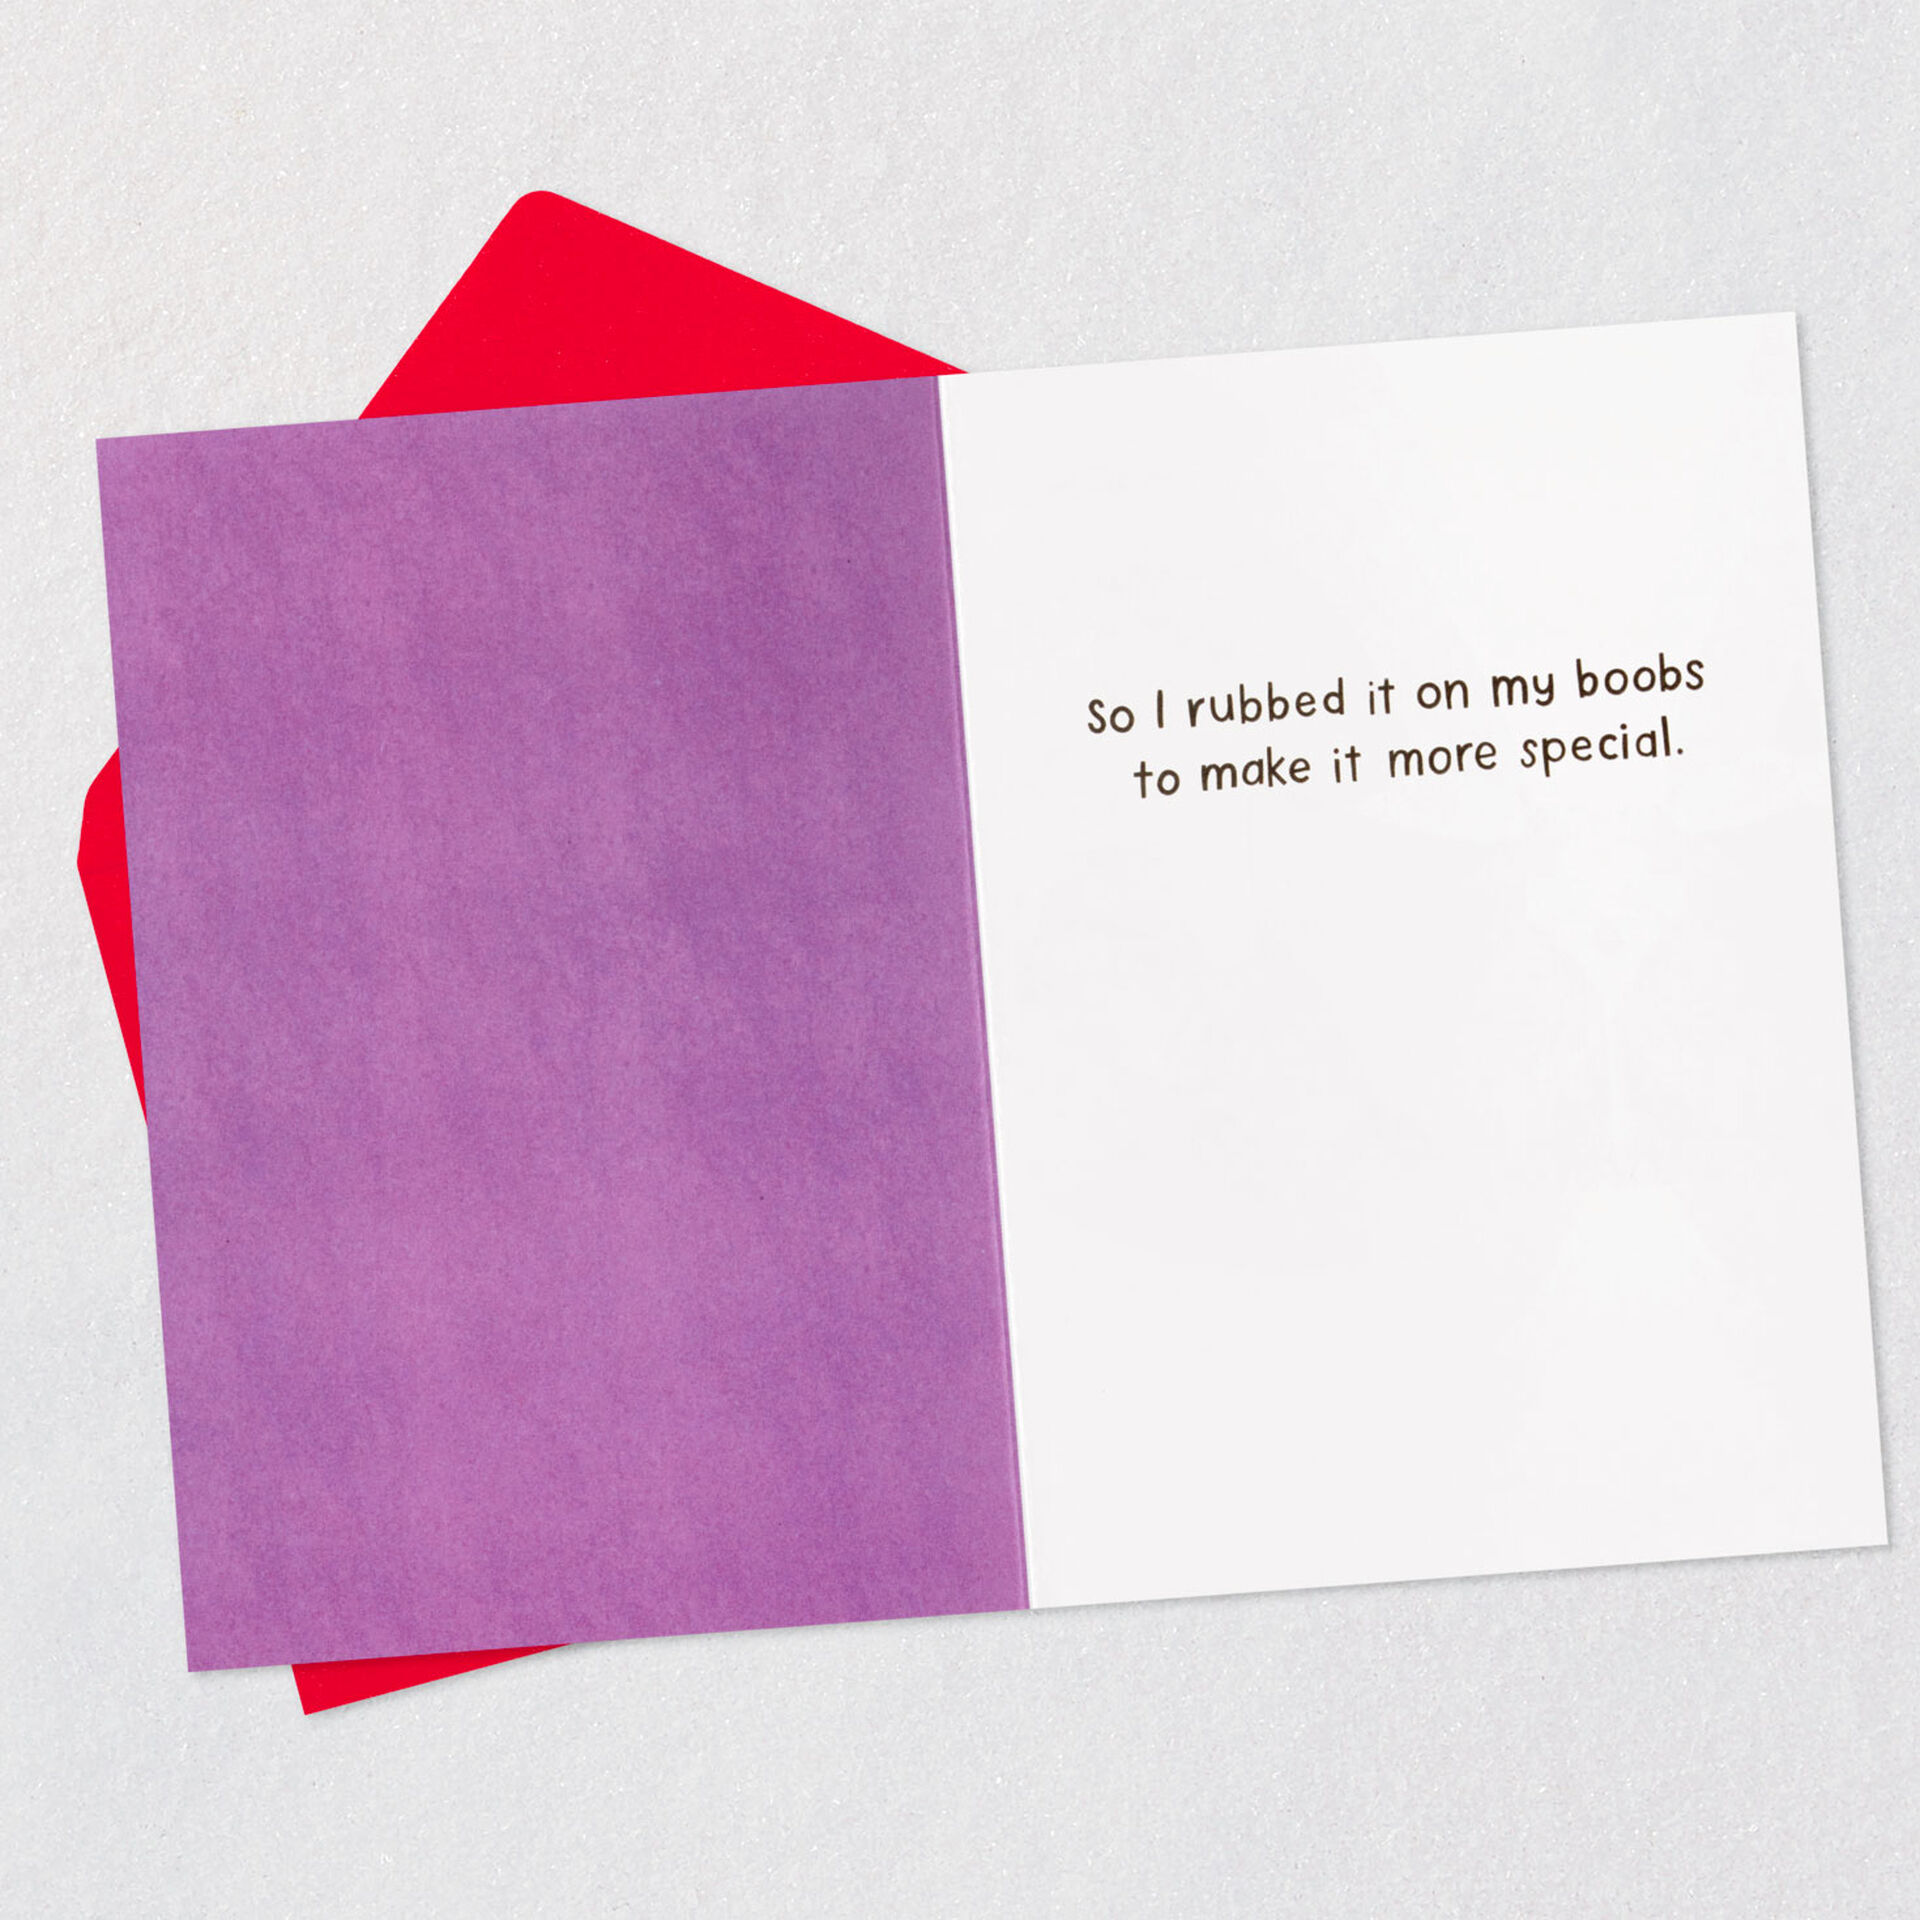 Rubbed-My-Boobs-on-It-Funny-Love-Card-for-Him_349ZV8926_03